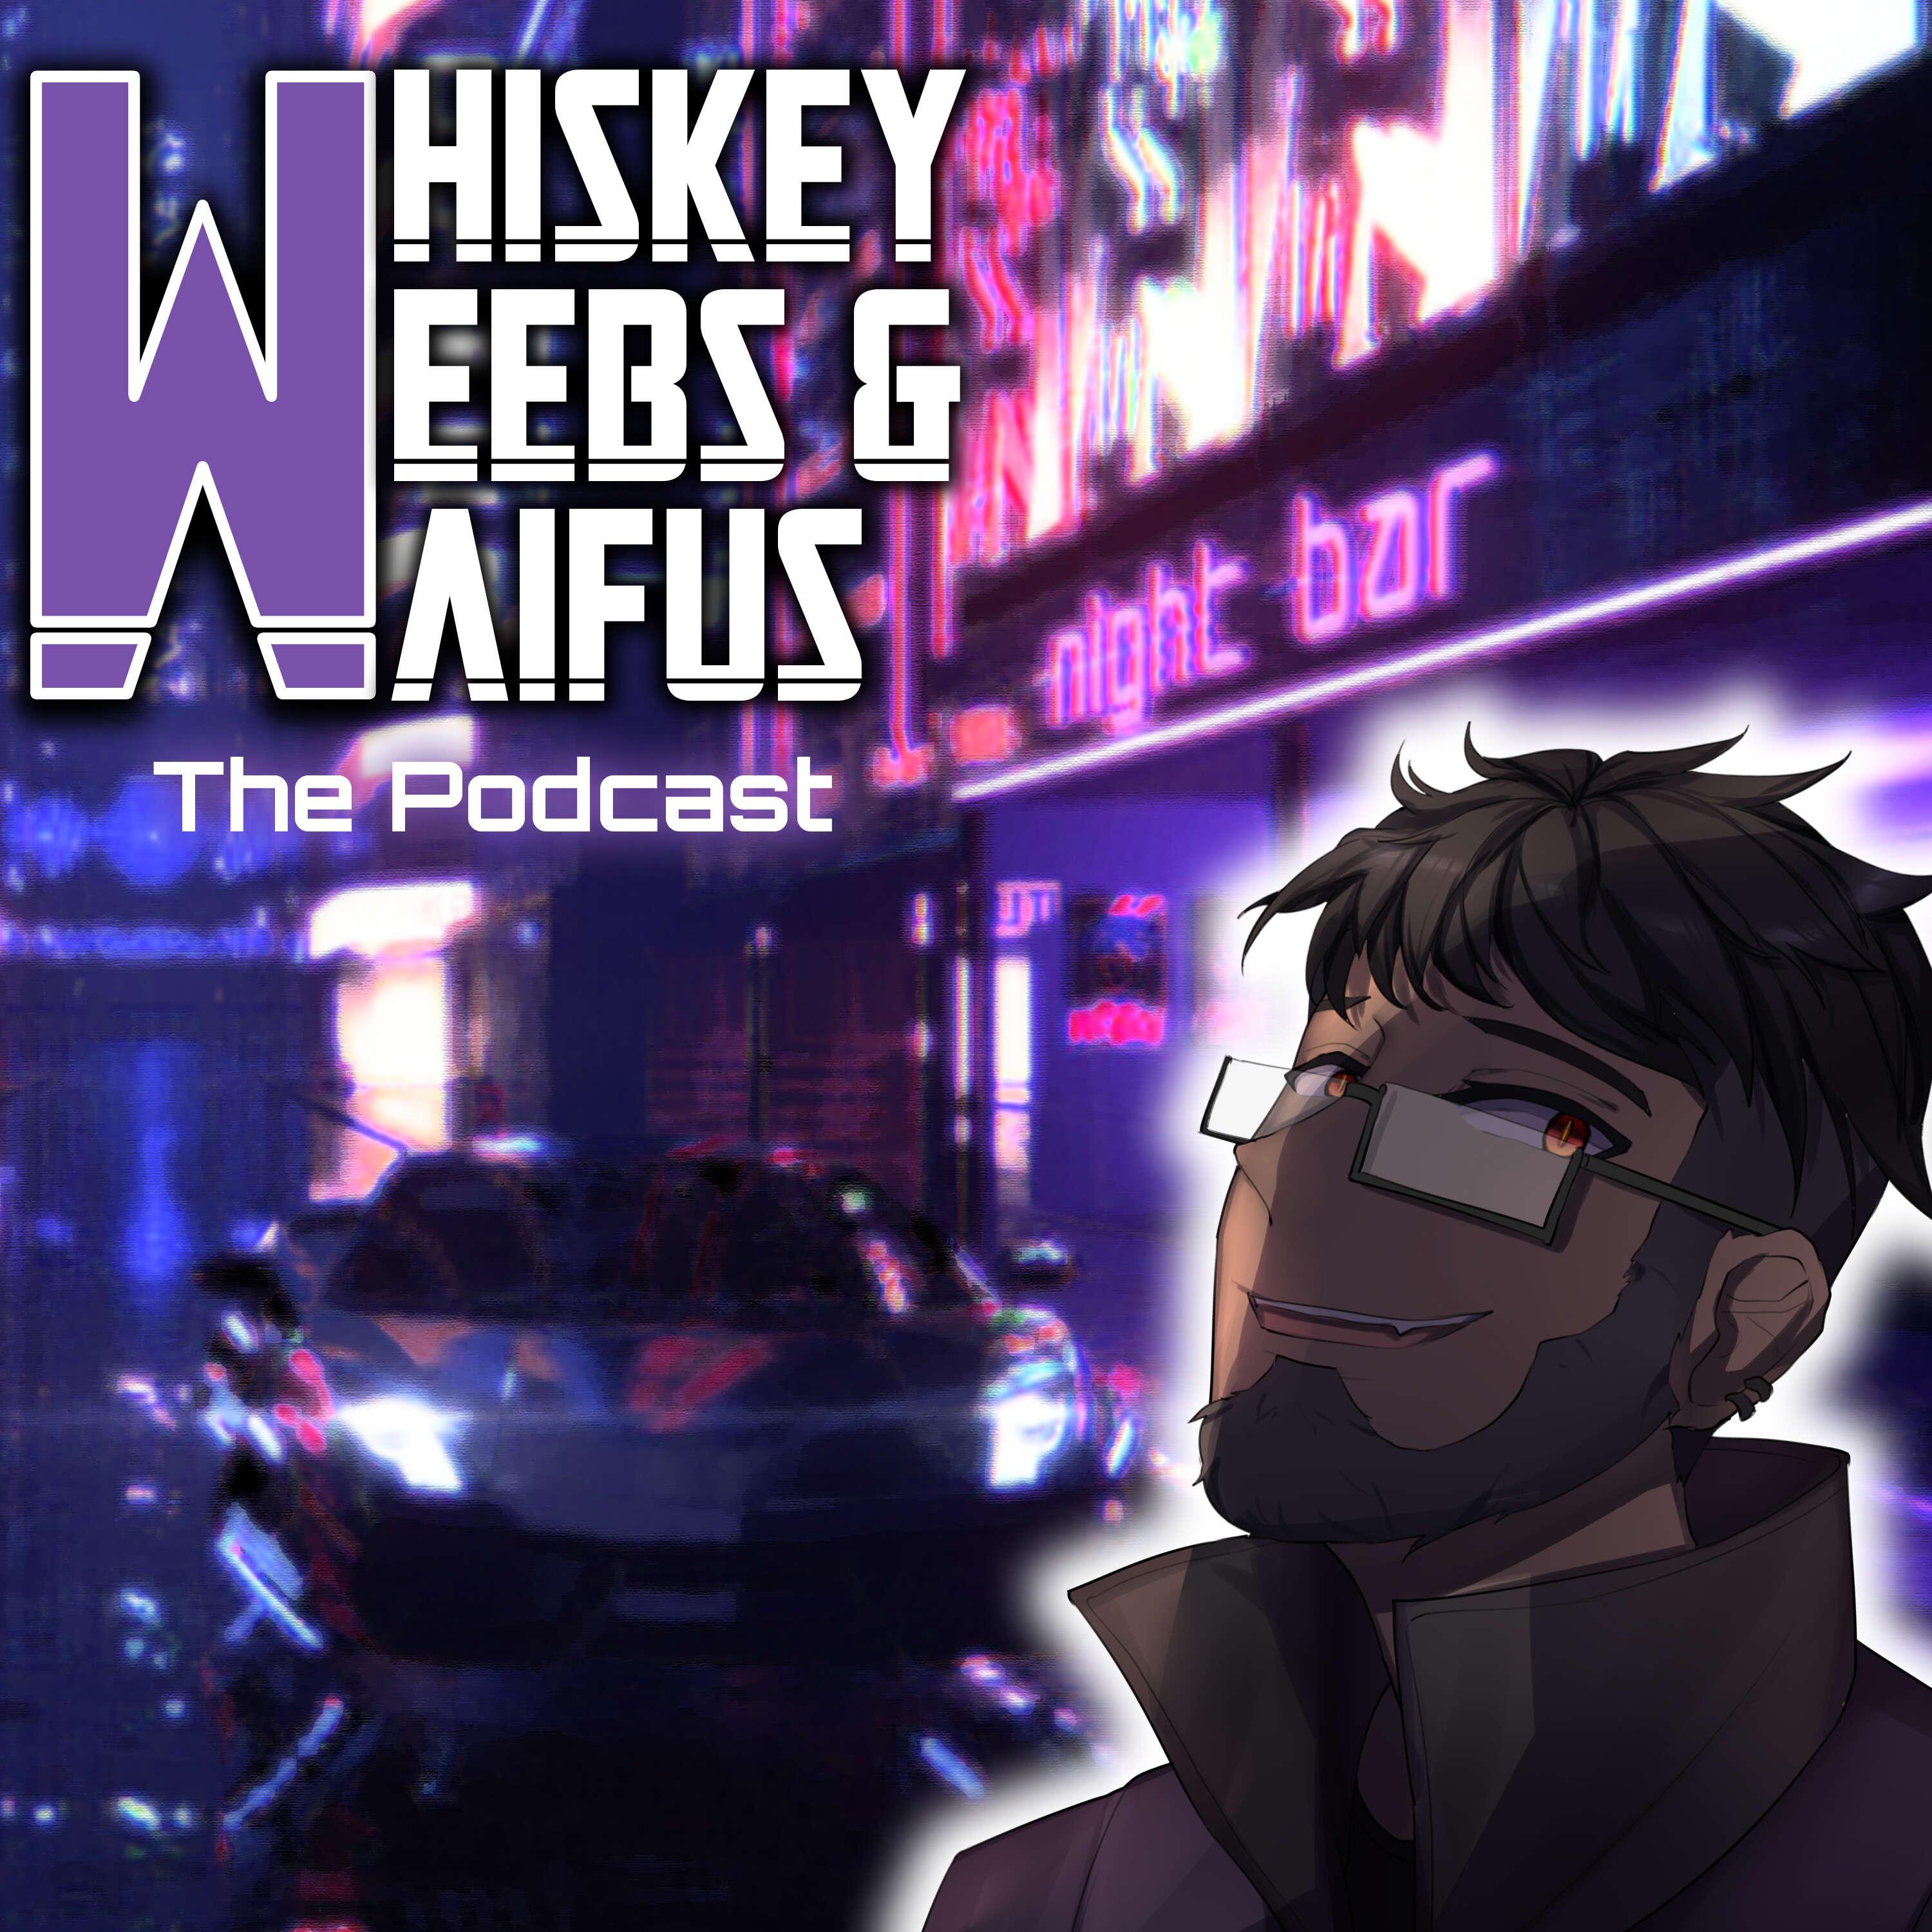 Whiskey, Weebs & Waifus: The Podcast